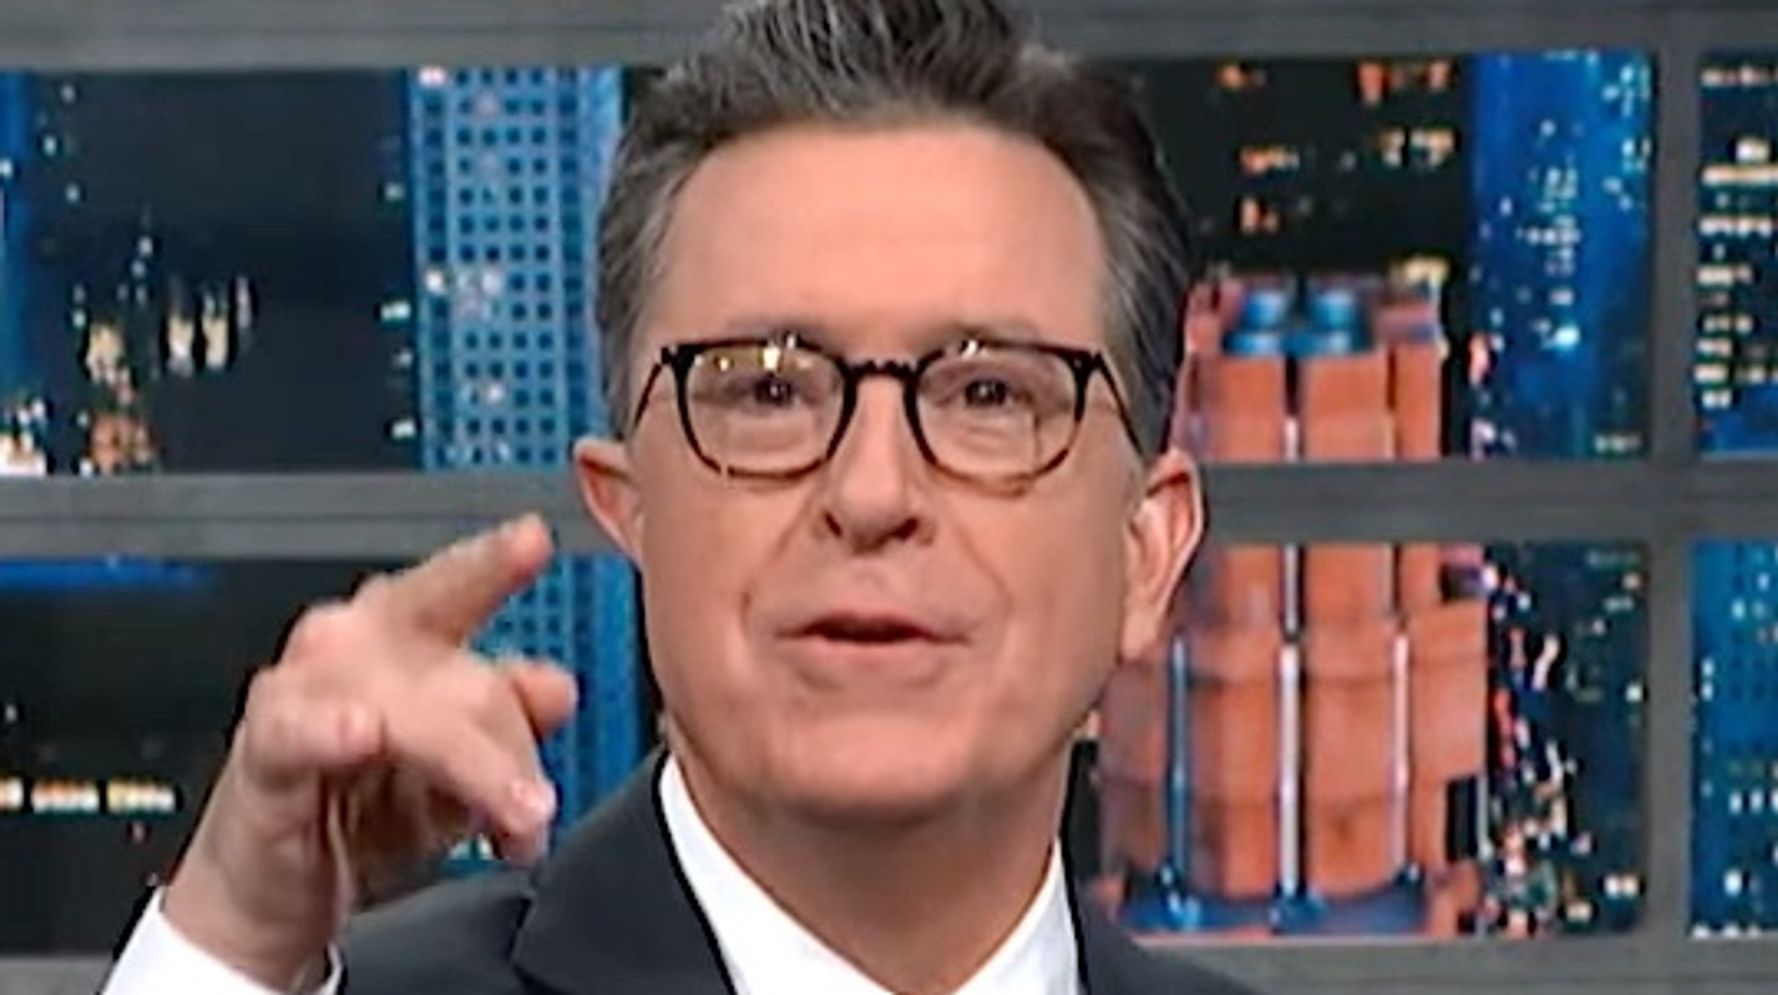 Stephen Colbert Finds The Most Chilling Part Of The New Trump Revelations